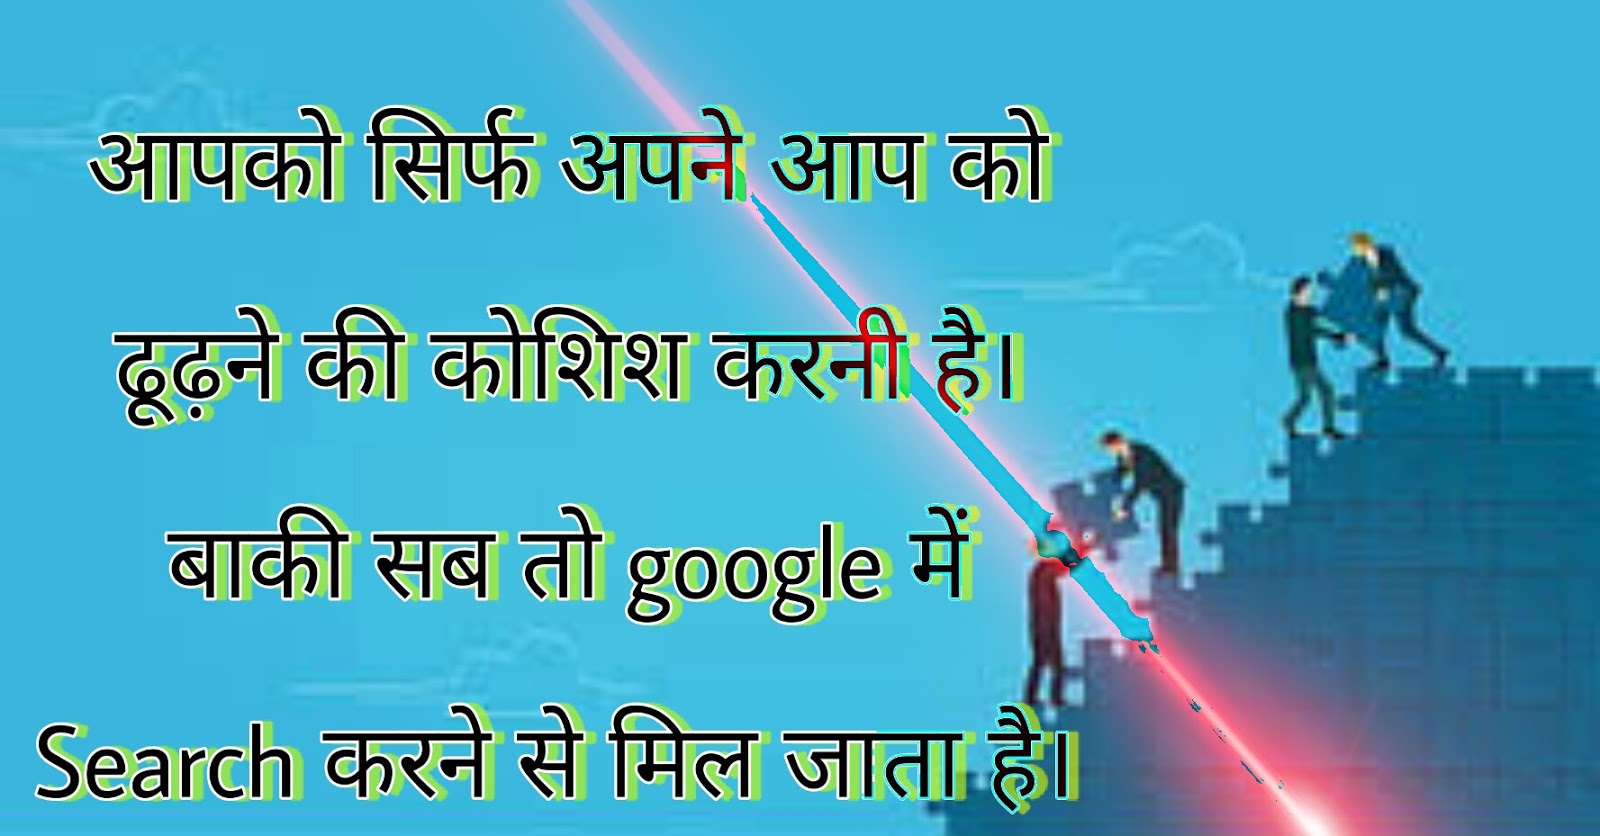 Top 13 Life quotes in hindi with images | Beautiful life quotes